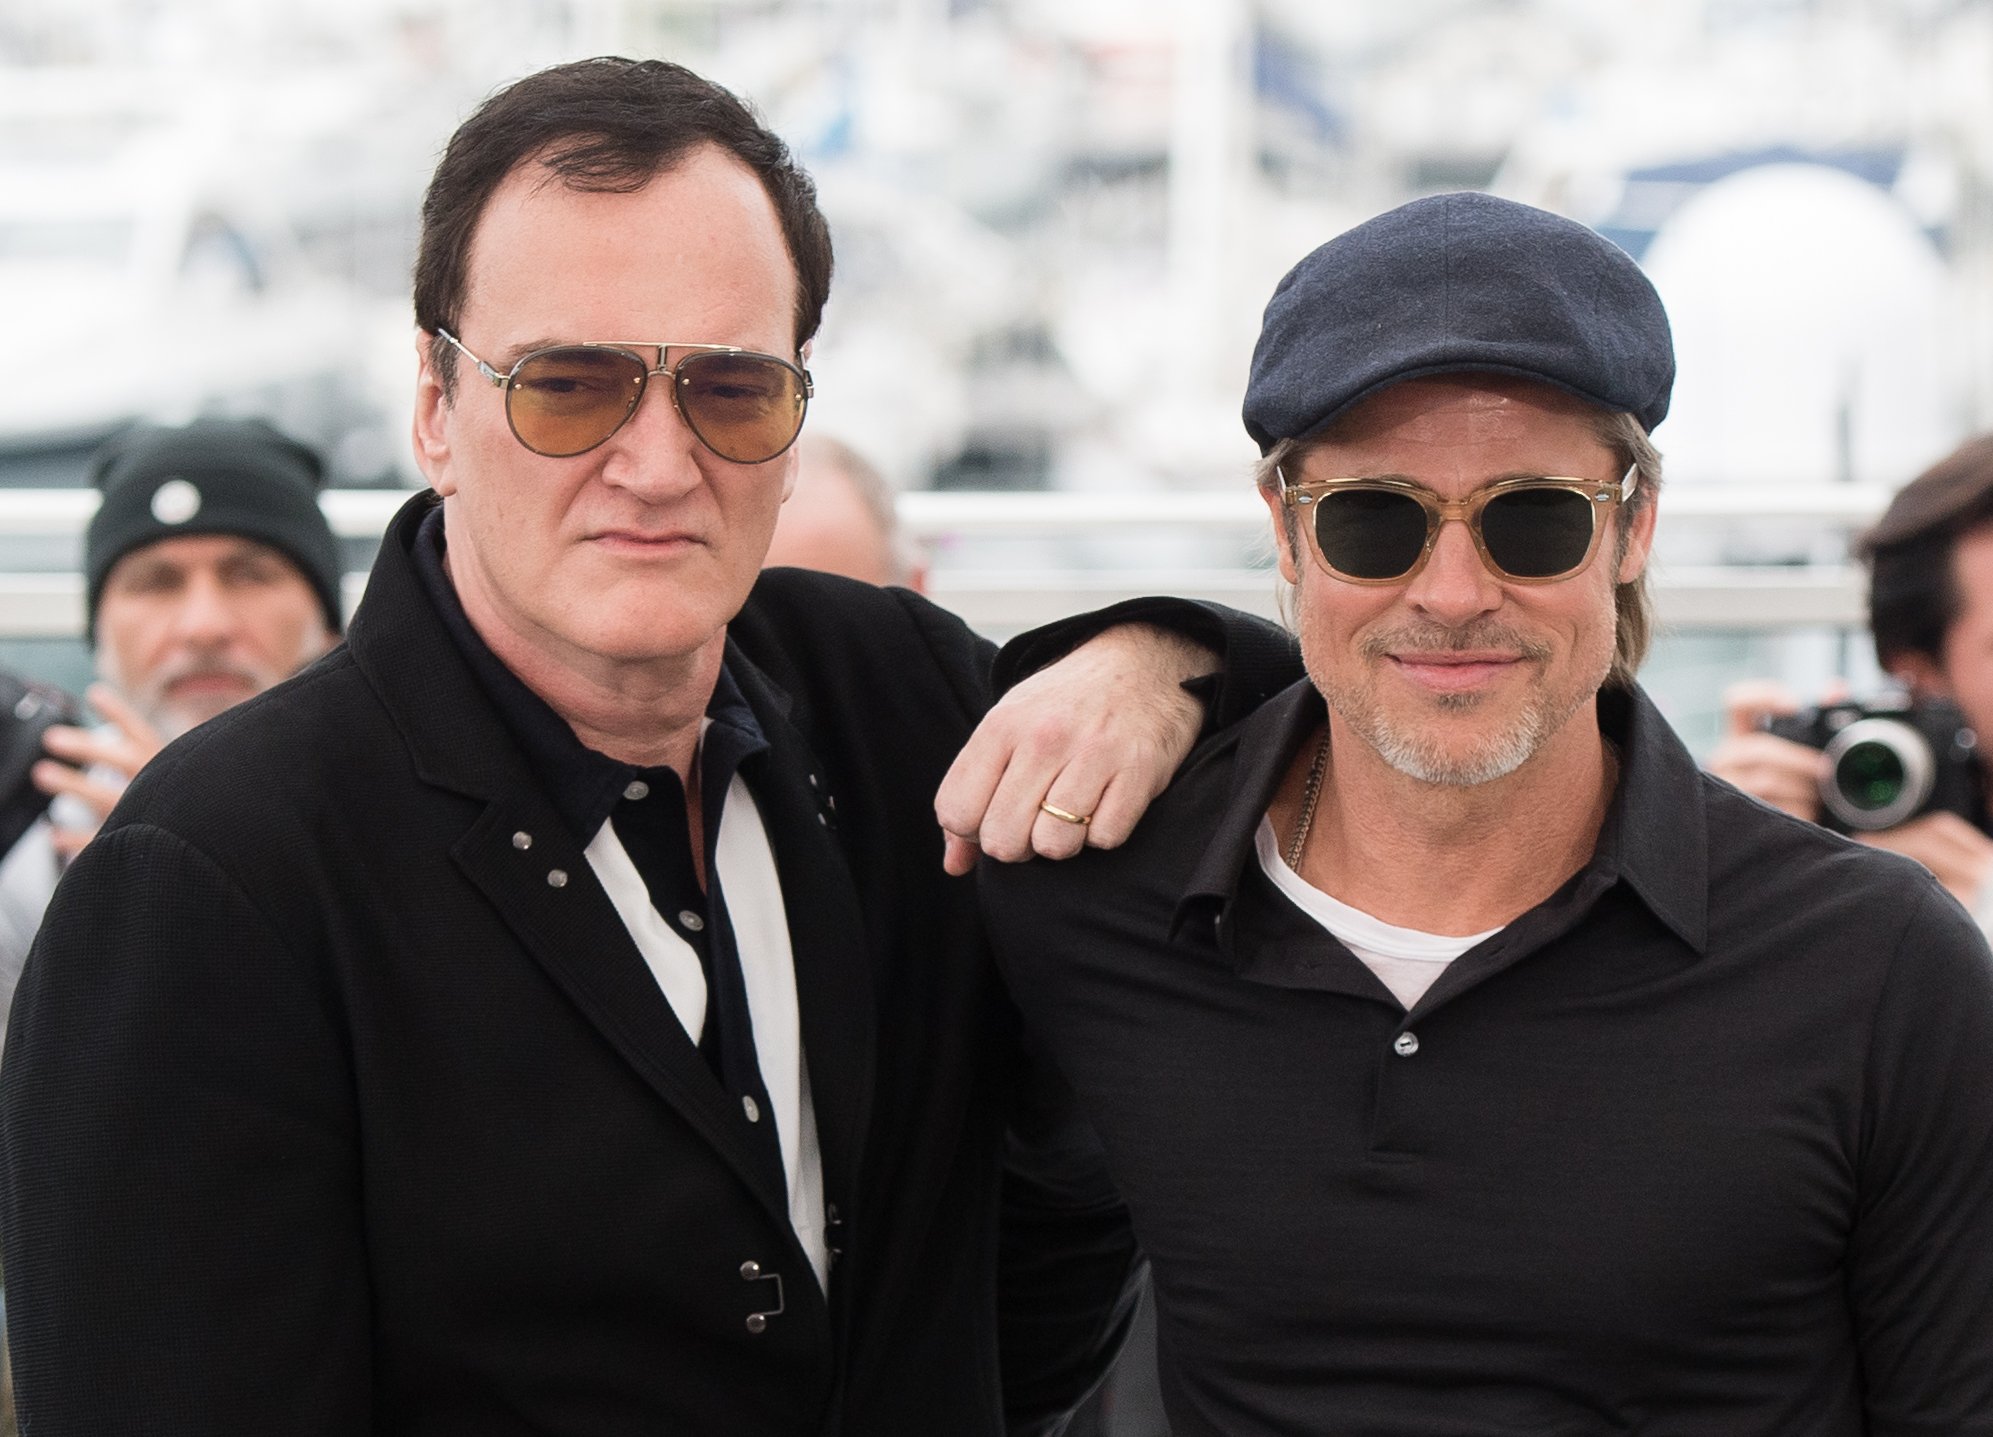 Quentin Tarantino attend the photocall for the movie Once Upon a Time in Hollywood at the 72nd annual Cannes film festival